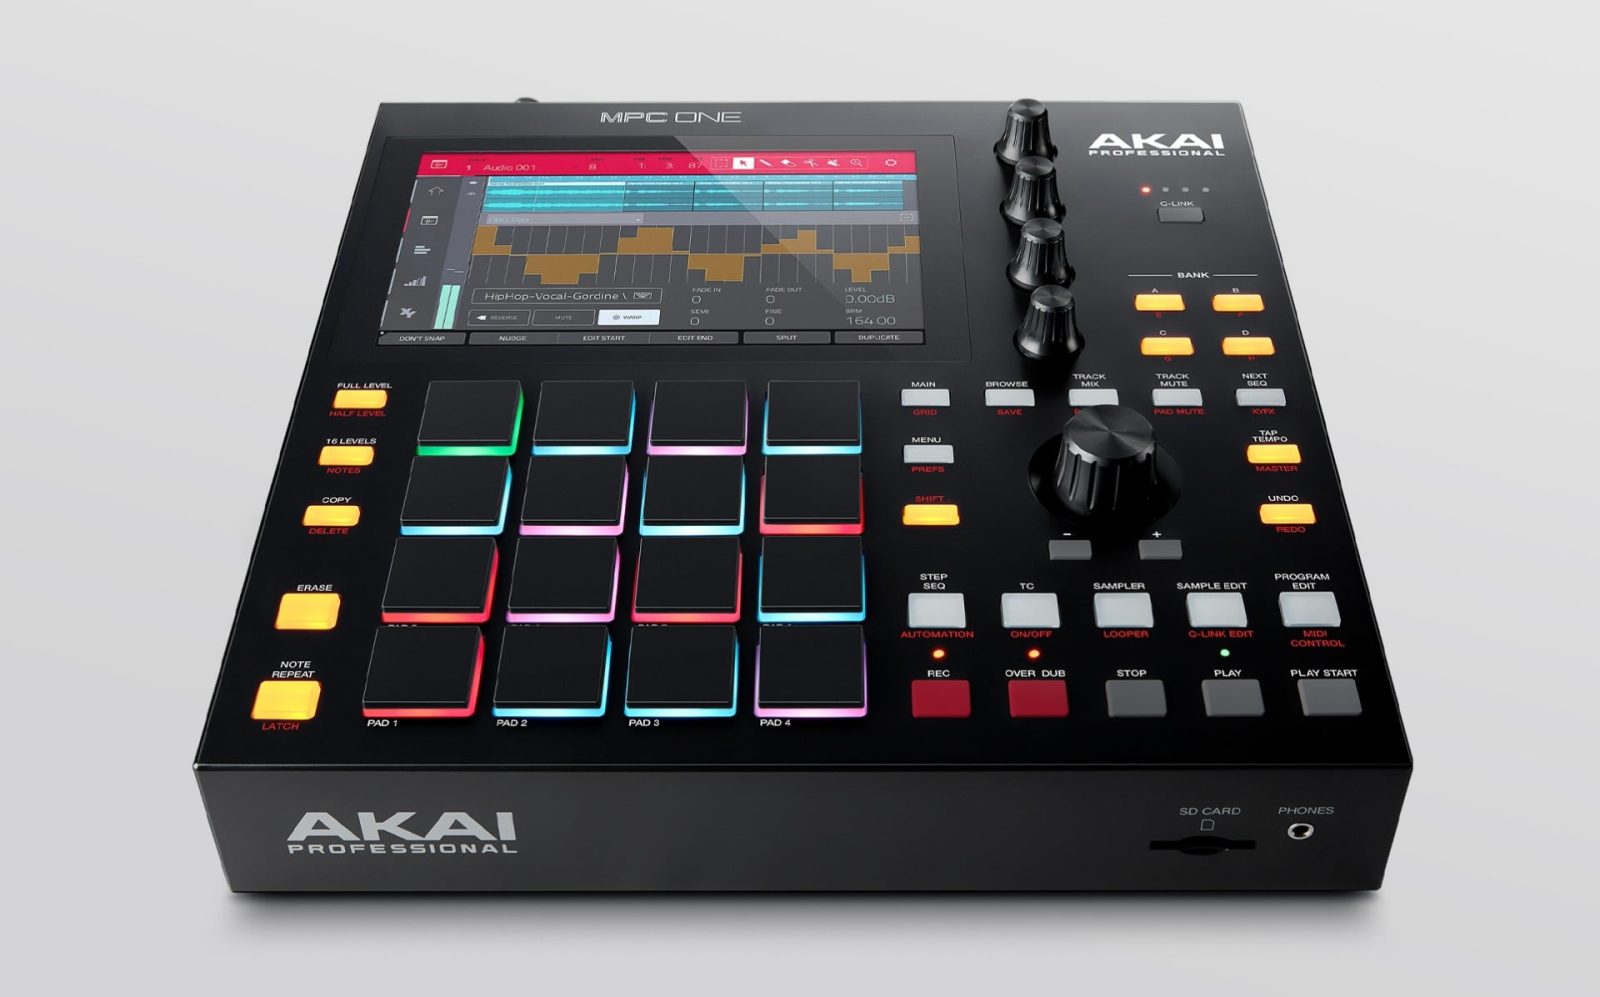 Akai Pro announces MPC One standalone music production solution